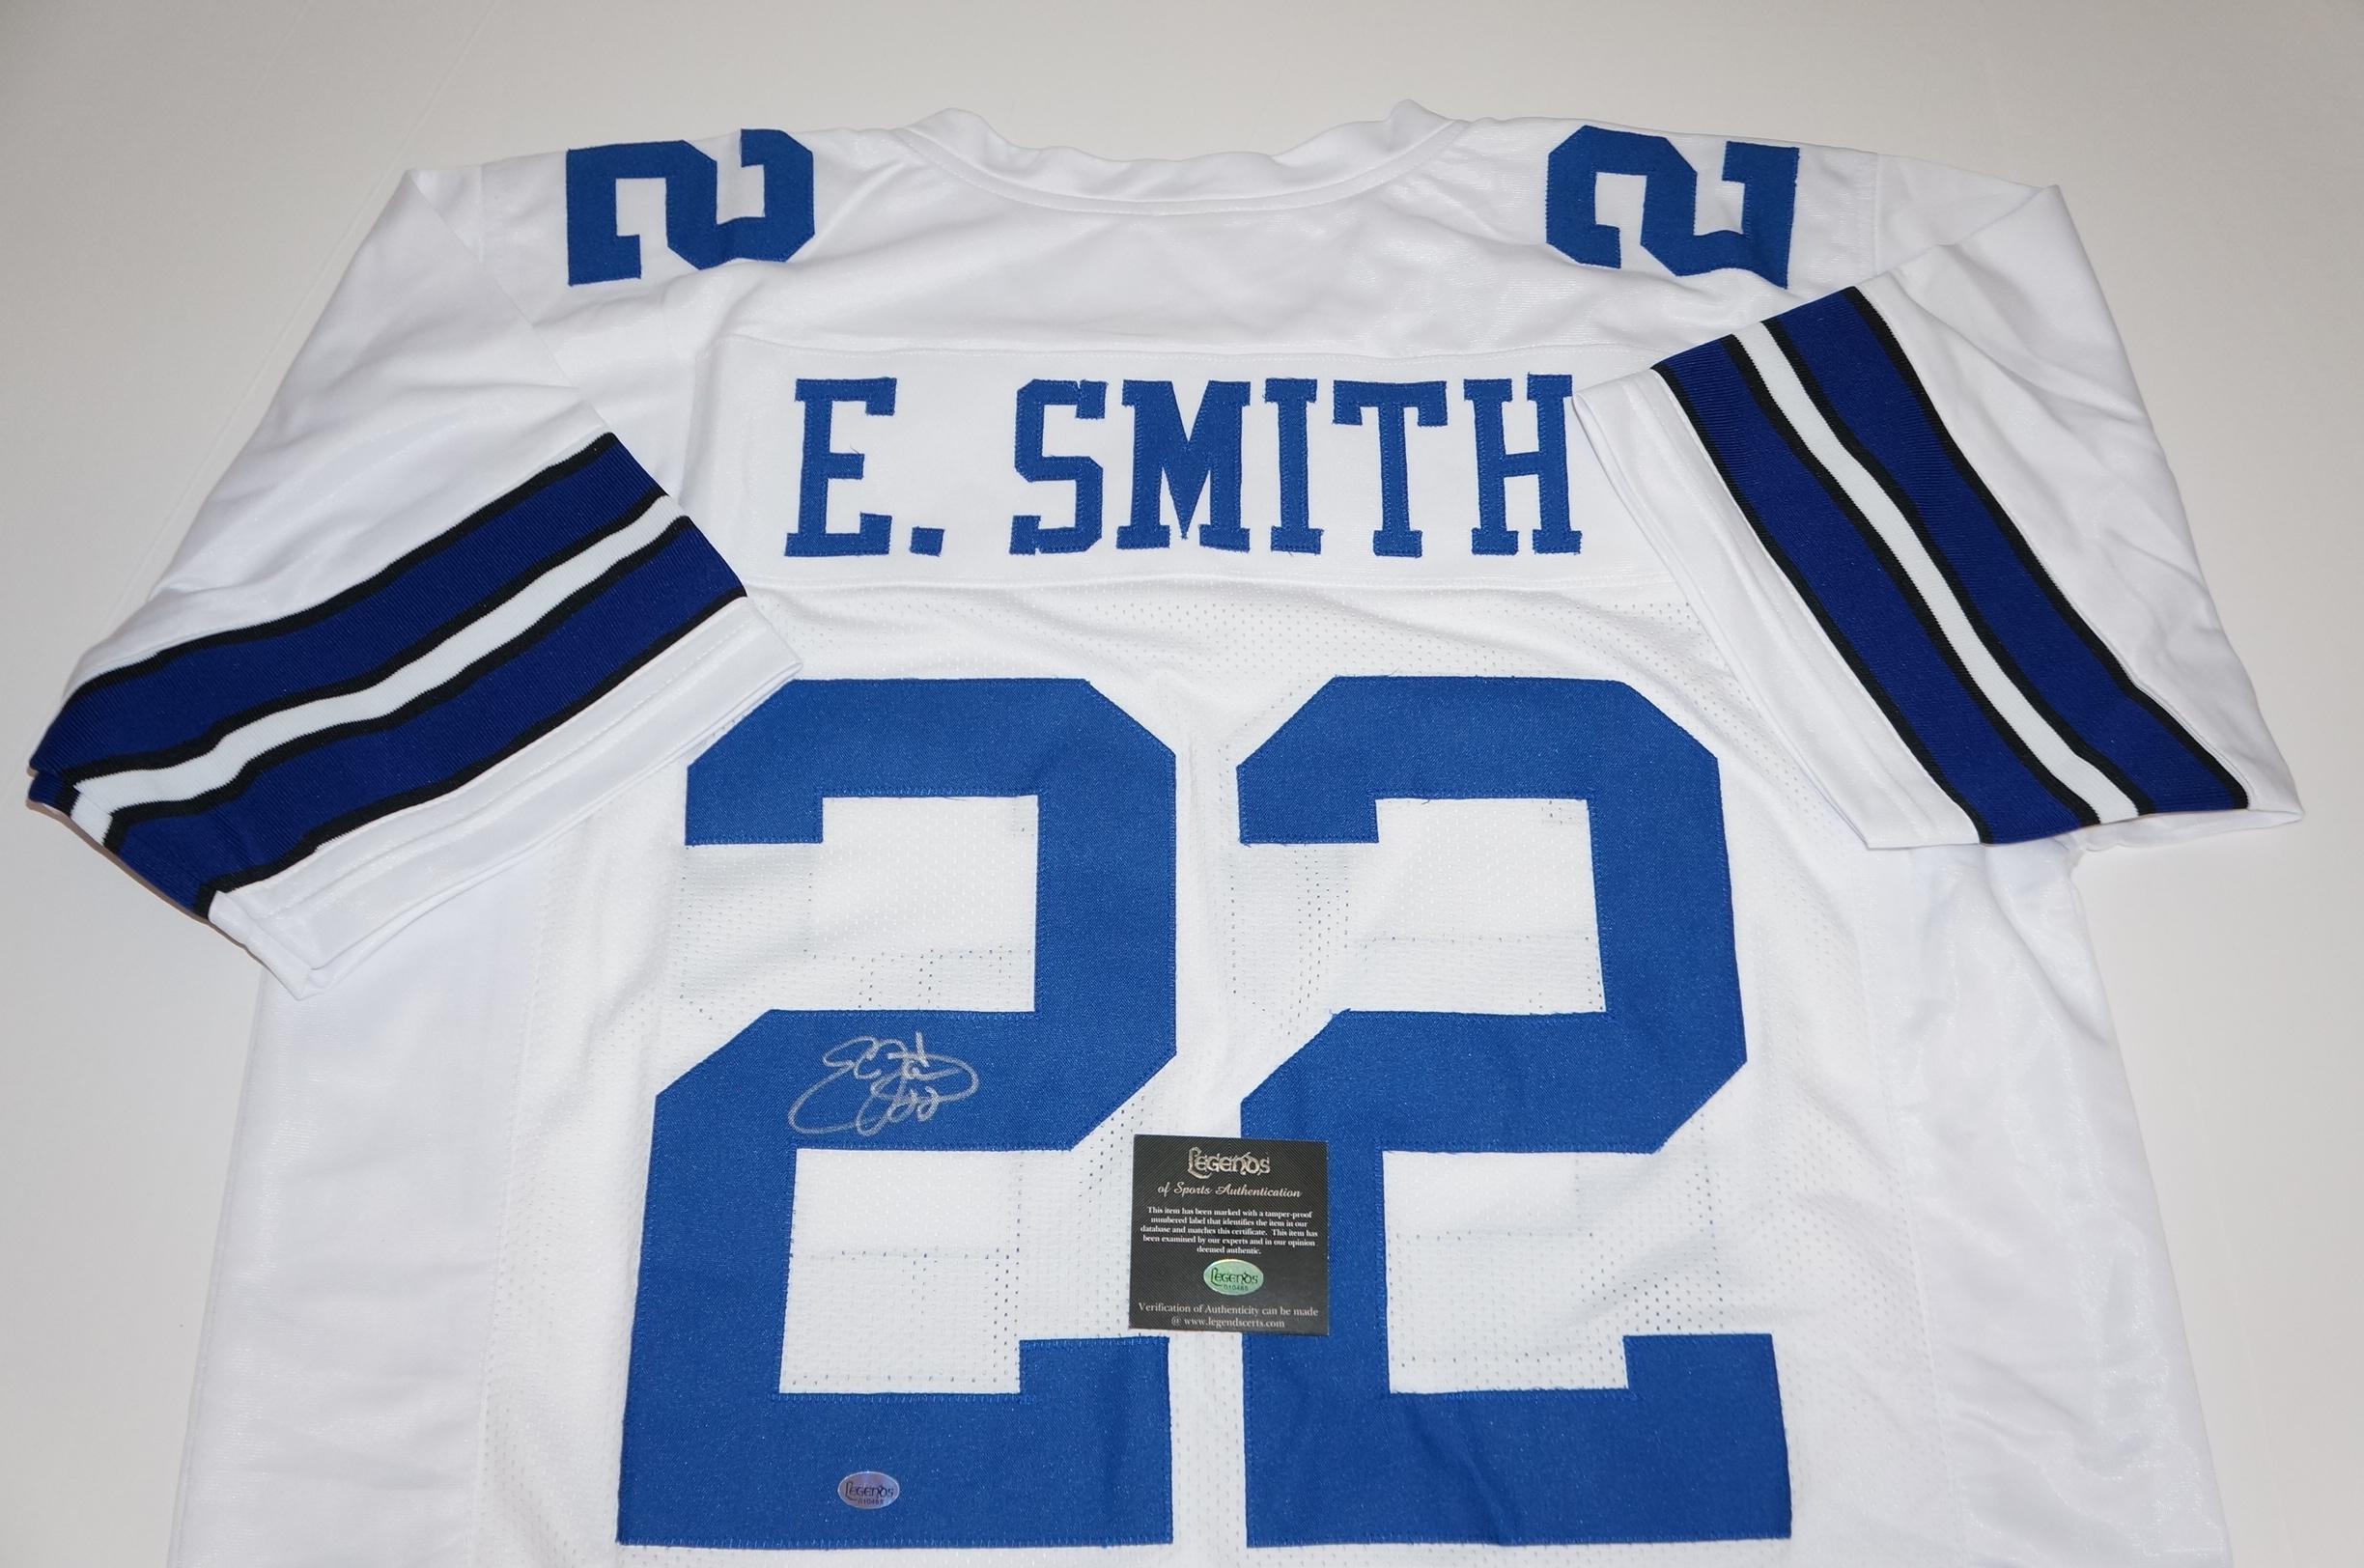 Emmitt Smith - NFL Hall of Fame - signed Dallas Cowboys Jersey